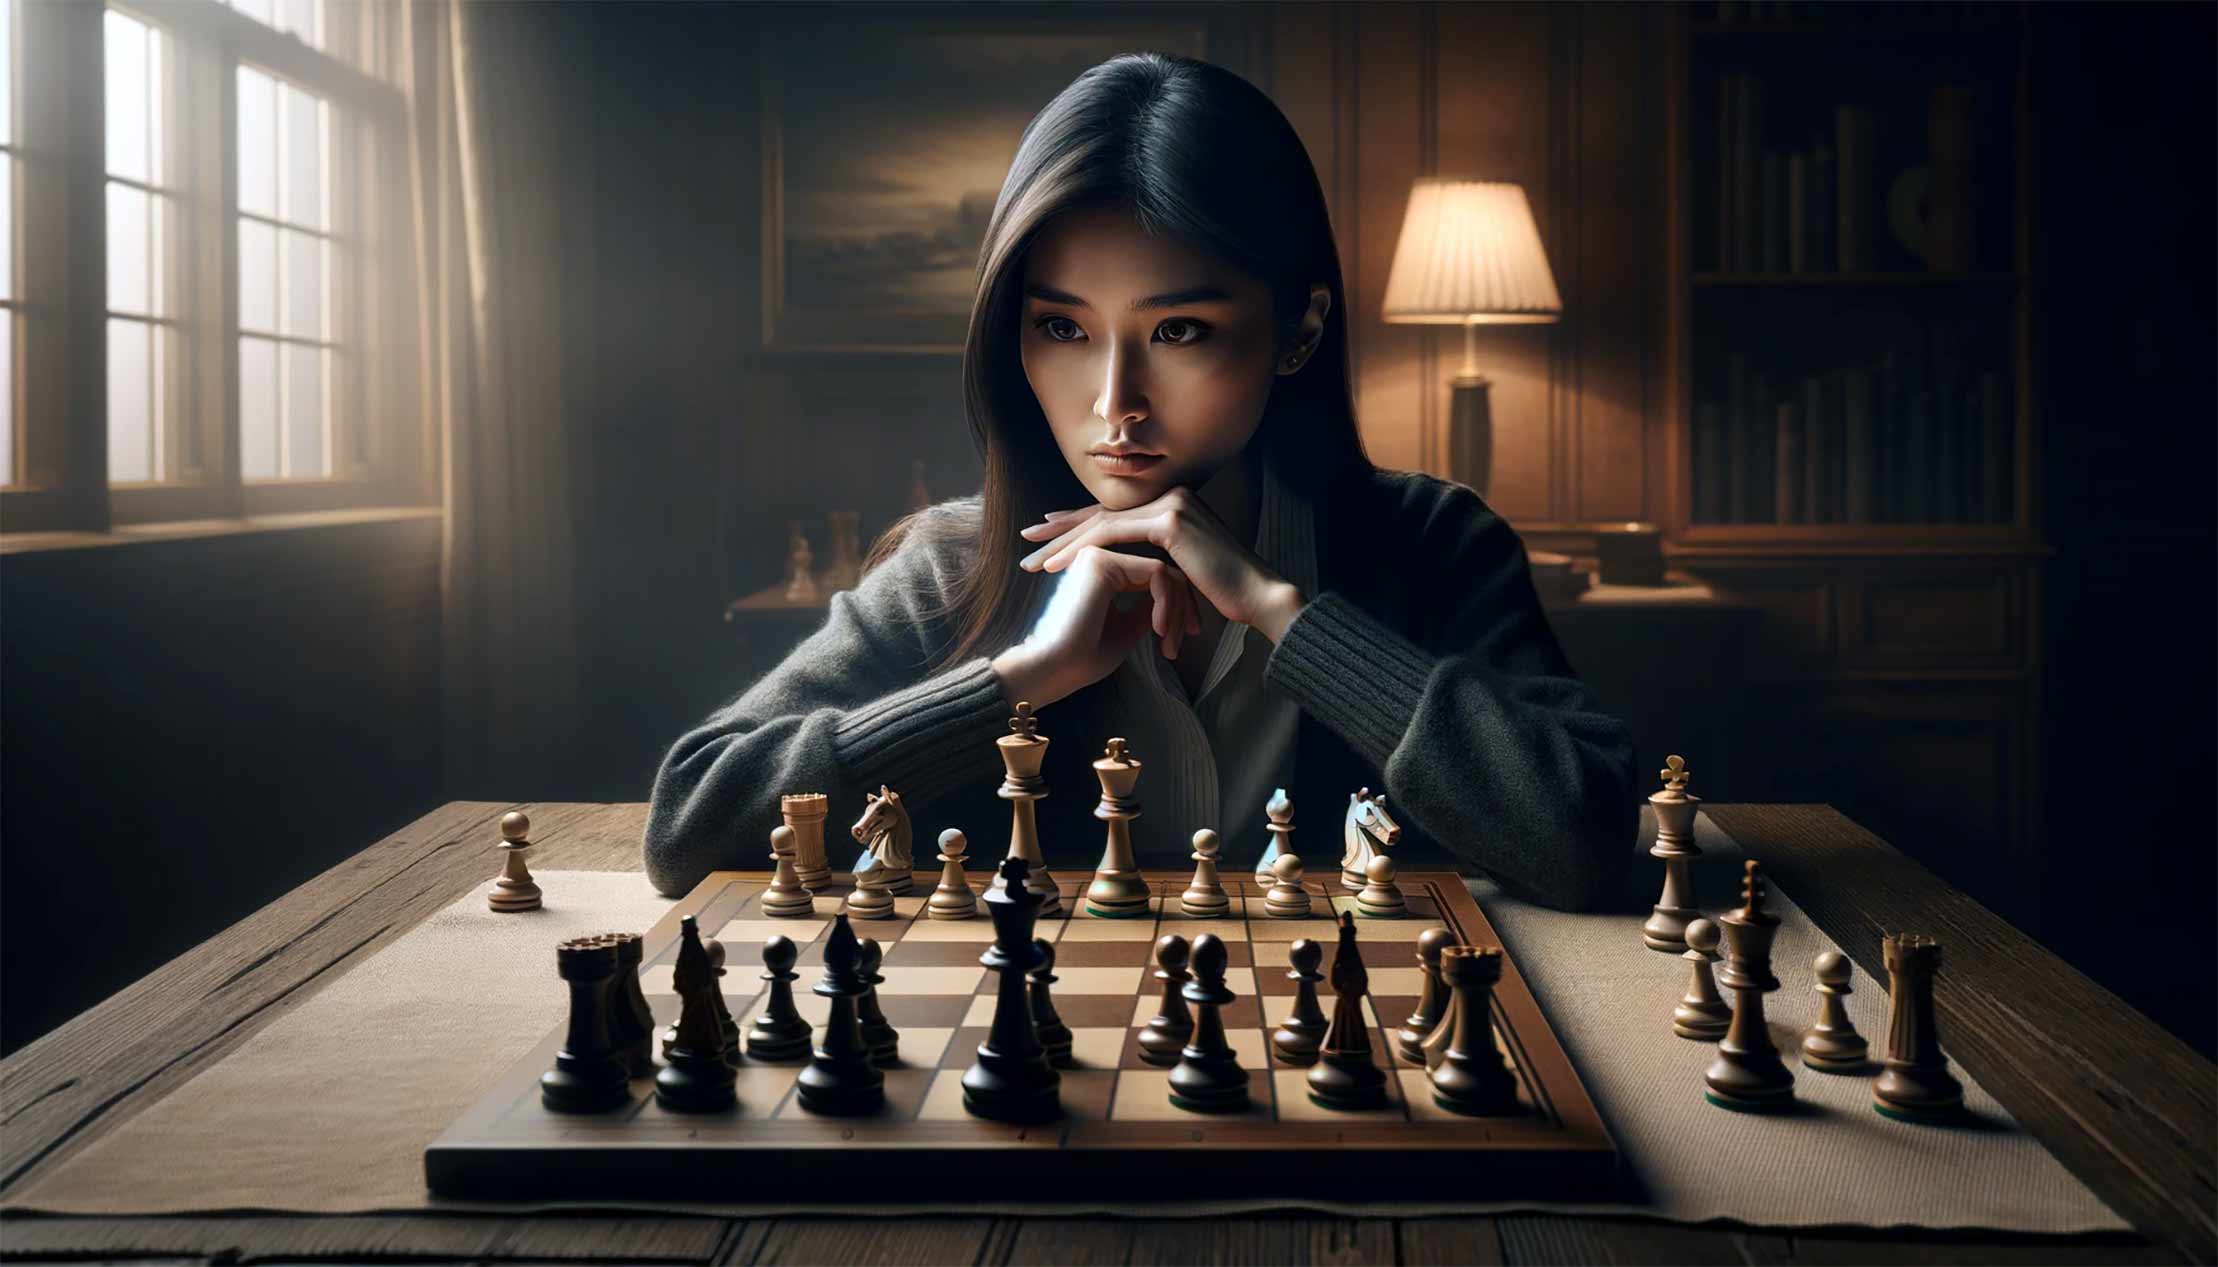 Best Chess Moves & Maneuvers Every Chess Player Must Know